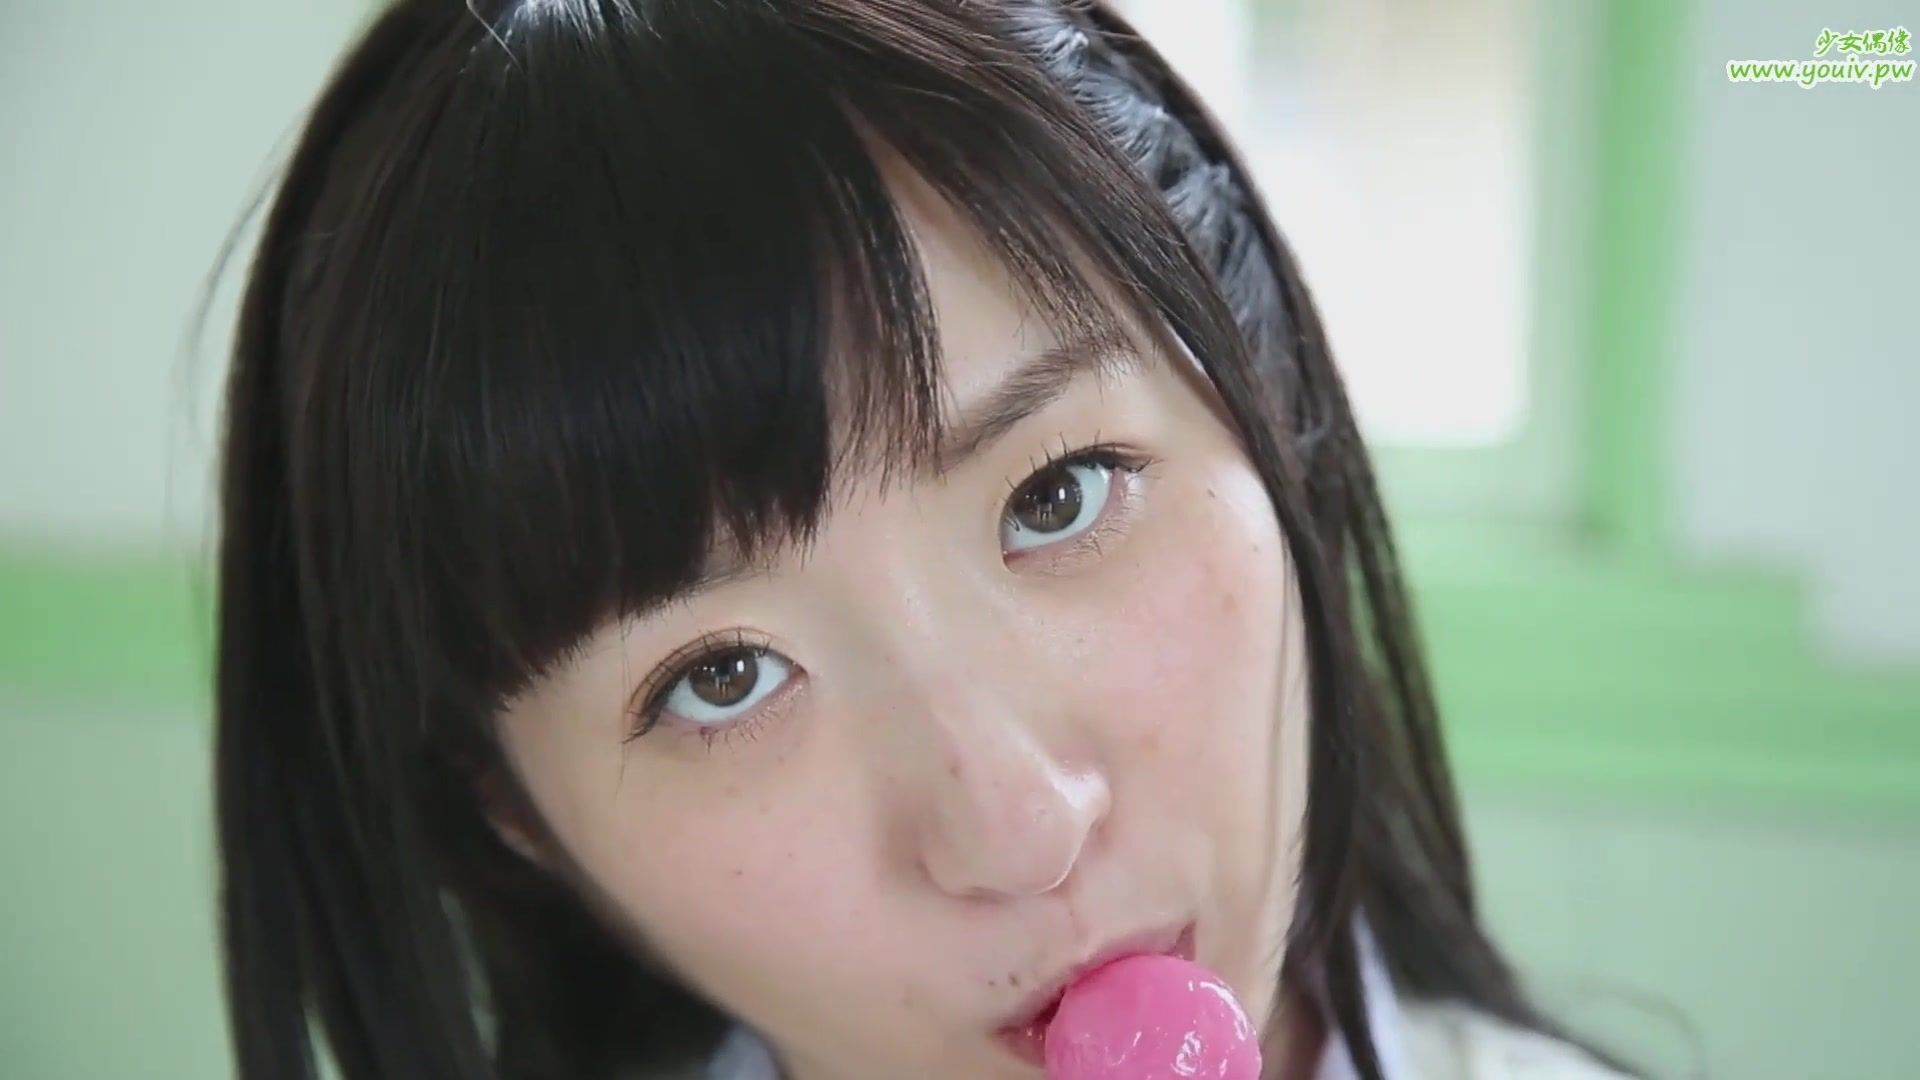 Nsfw Gifs A Japanese idol sex princess touches herself in different places Anal Creampie